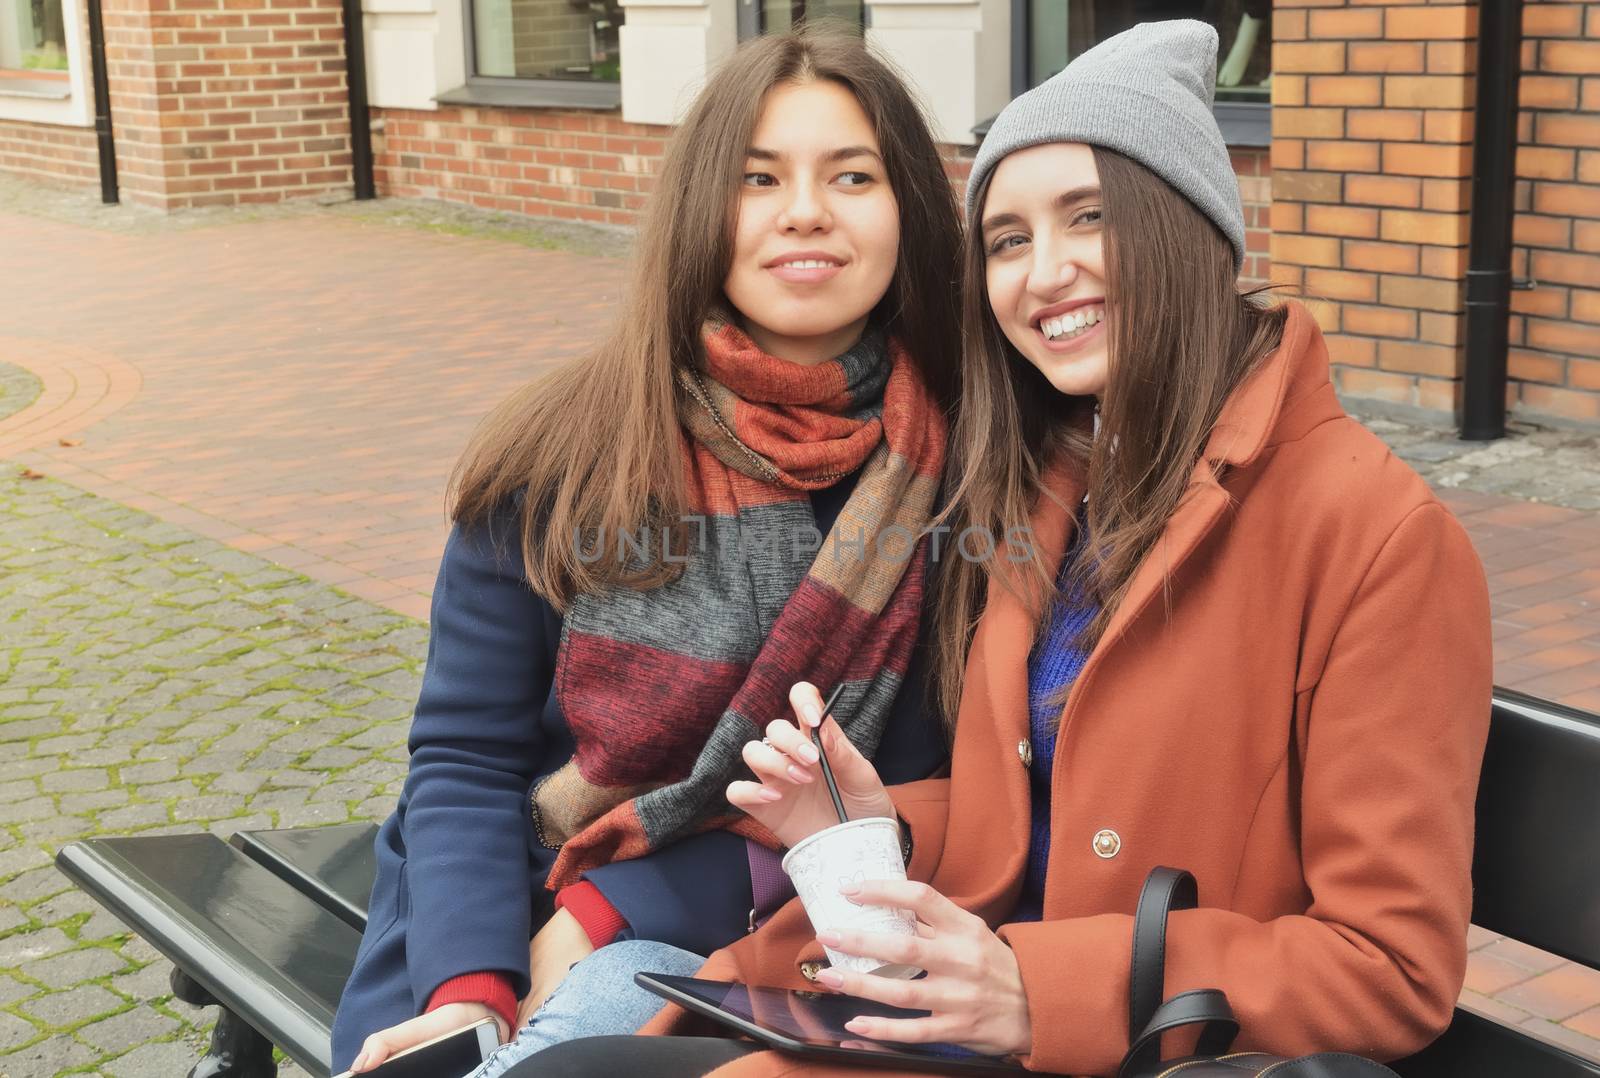 Two girls sit on the bench outside and smile, look at the photographer. Dressed in a coat, hold the phone and tablet in their hands. Asian and European